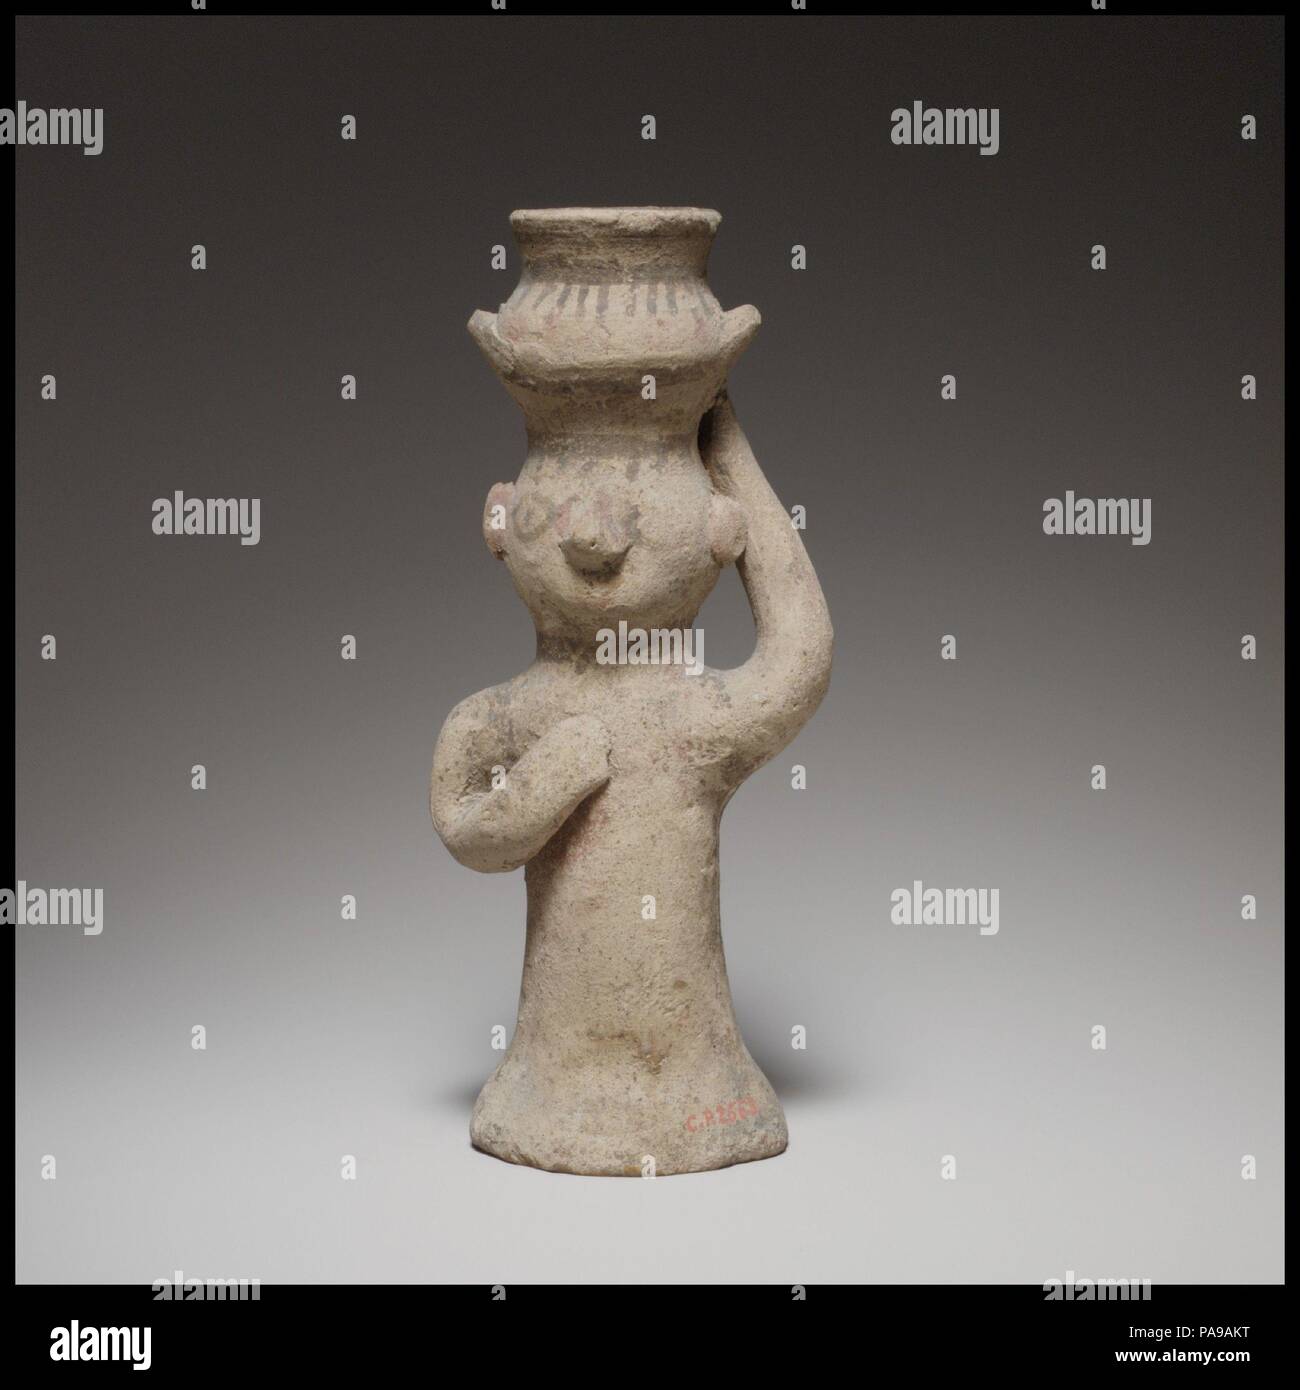 Standing female figurine holding an amphora on her head. Culture: Cypriot. Dimensions: H. 5 5/16 in. (13.5 cm). Date: ca. 750-600 B.C..  The cylindrical body is wheel-made and hollow. The upper part of the body, arms, head, and amphora are handmade. Museum: Metropolitan Museum of Art, New York, USA. Stock Photo